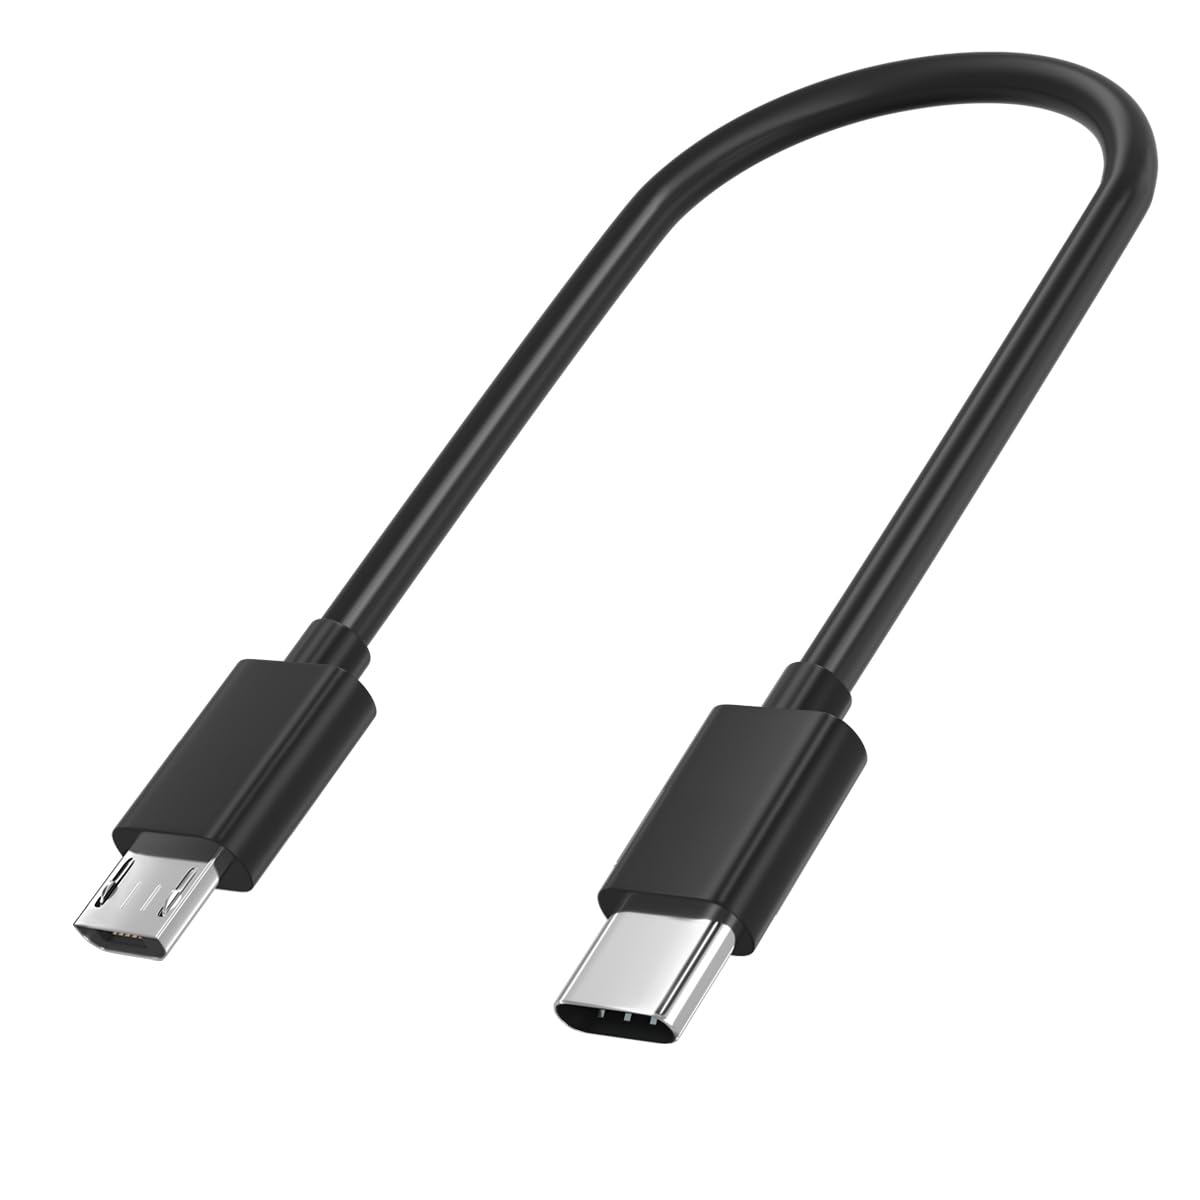 Samsung Galaxy S4 USB cable connected to a computer